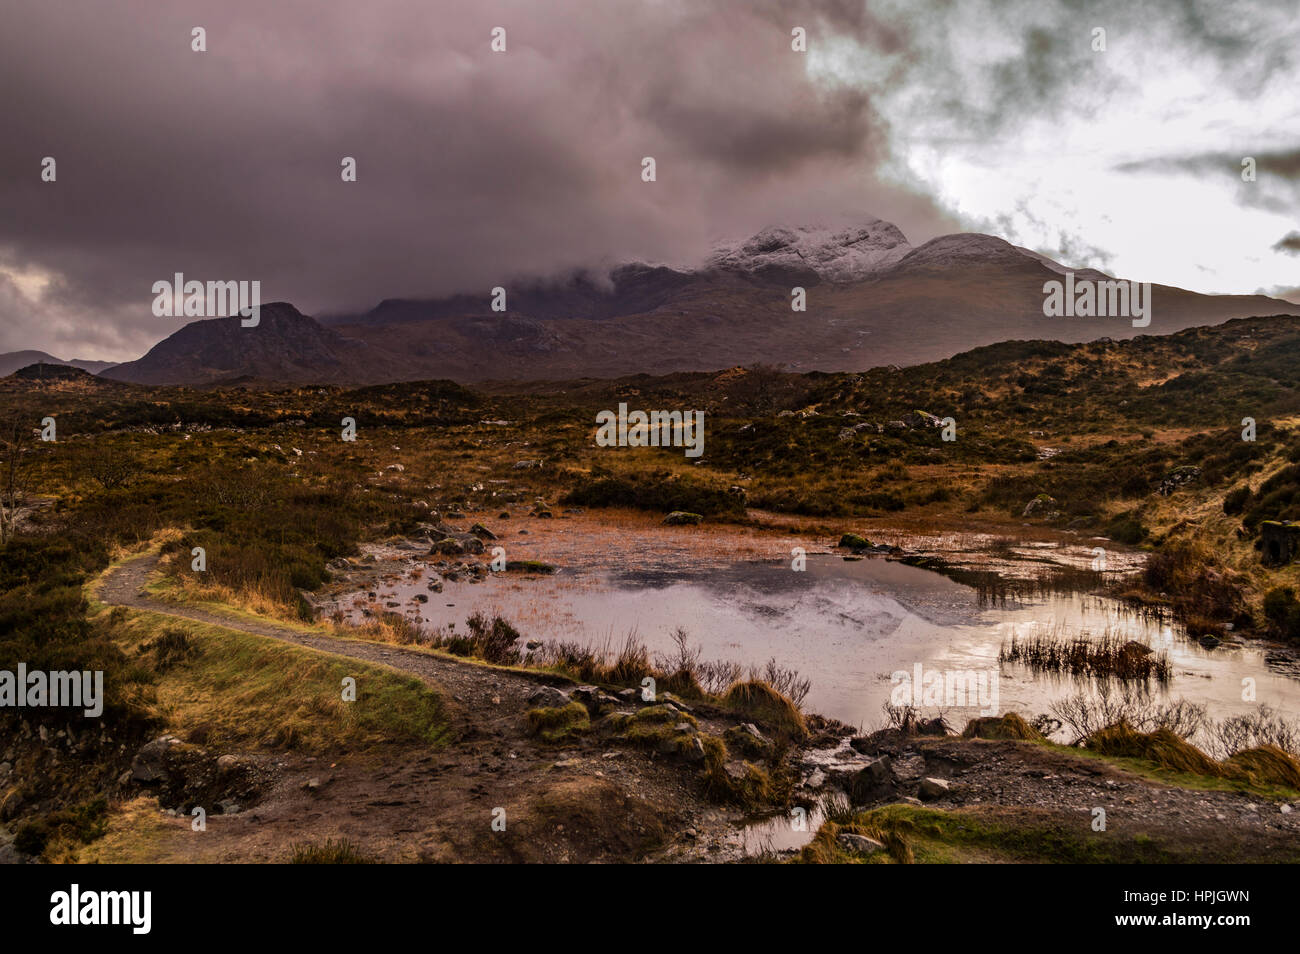 Snowcapped Cuillin Hills reflected in water at Sligachan, shrouded in clouds, on the Isle of Skye, Scotland. Stock Photo